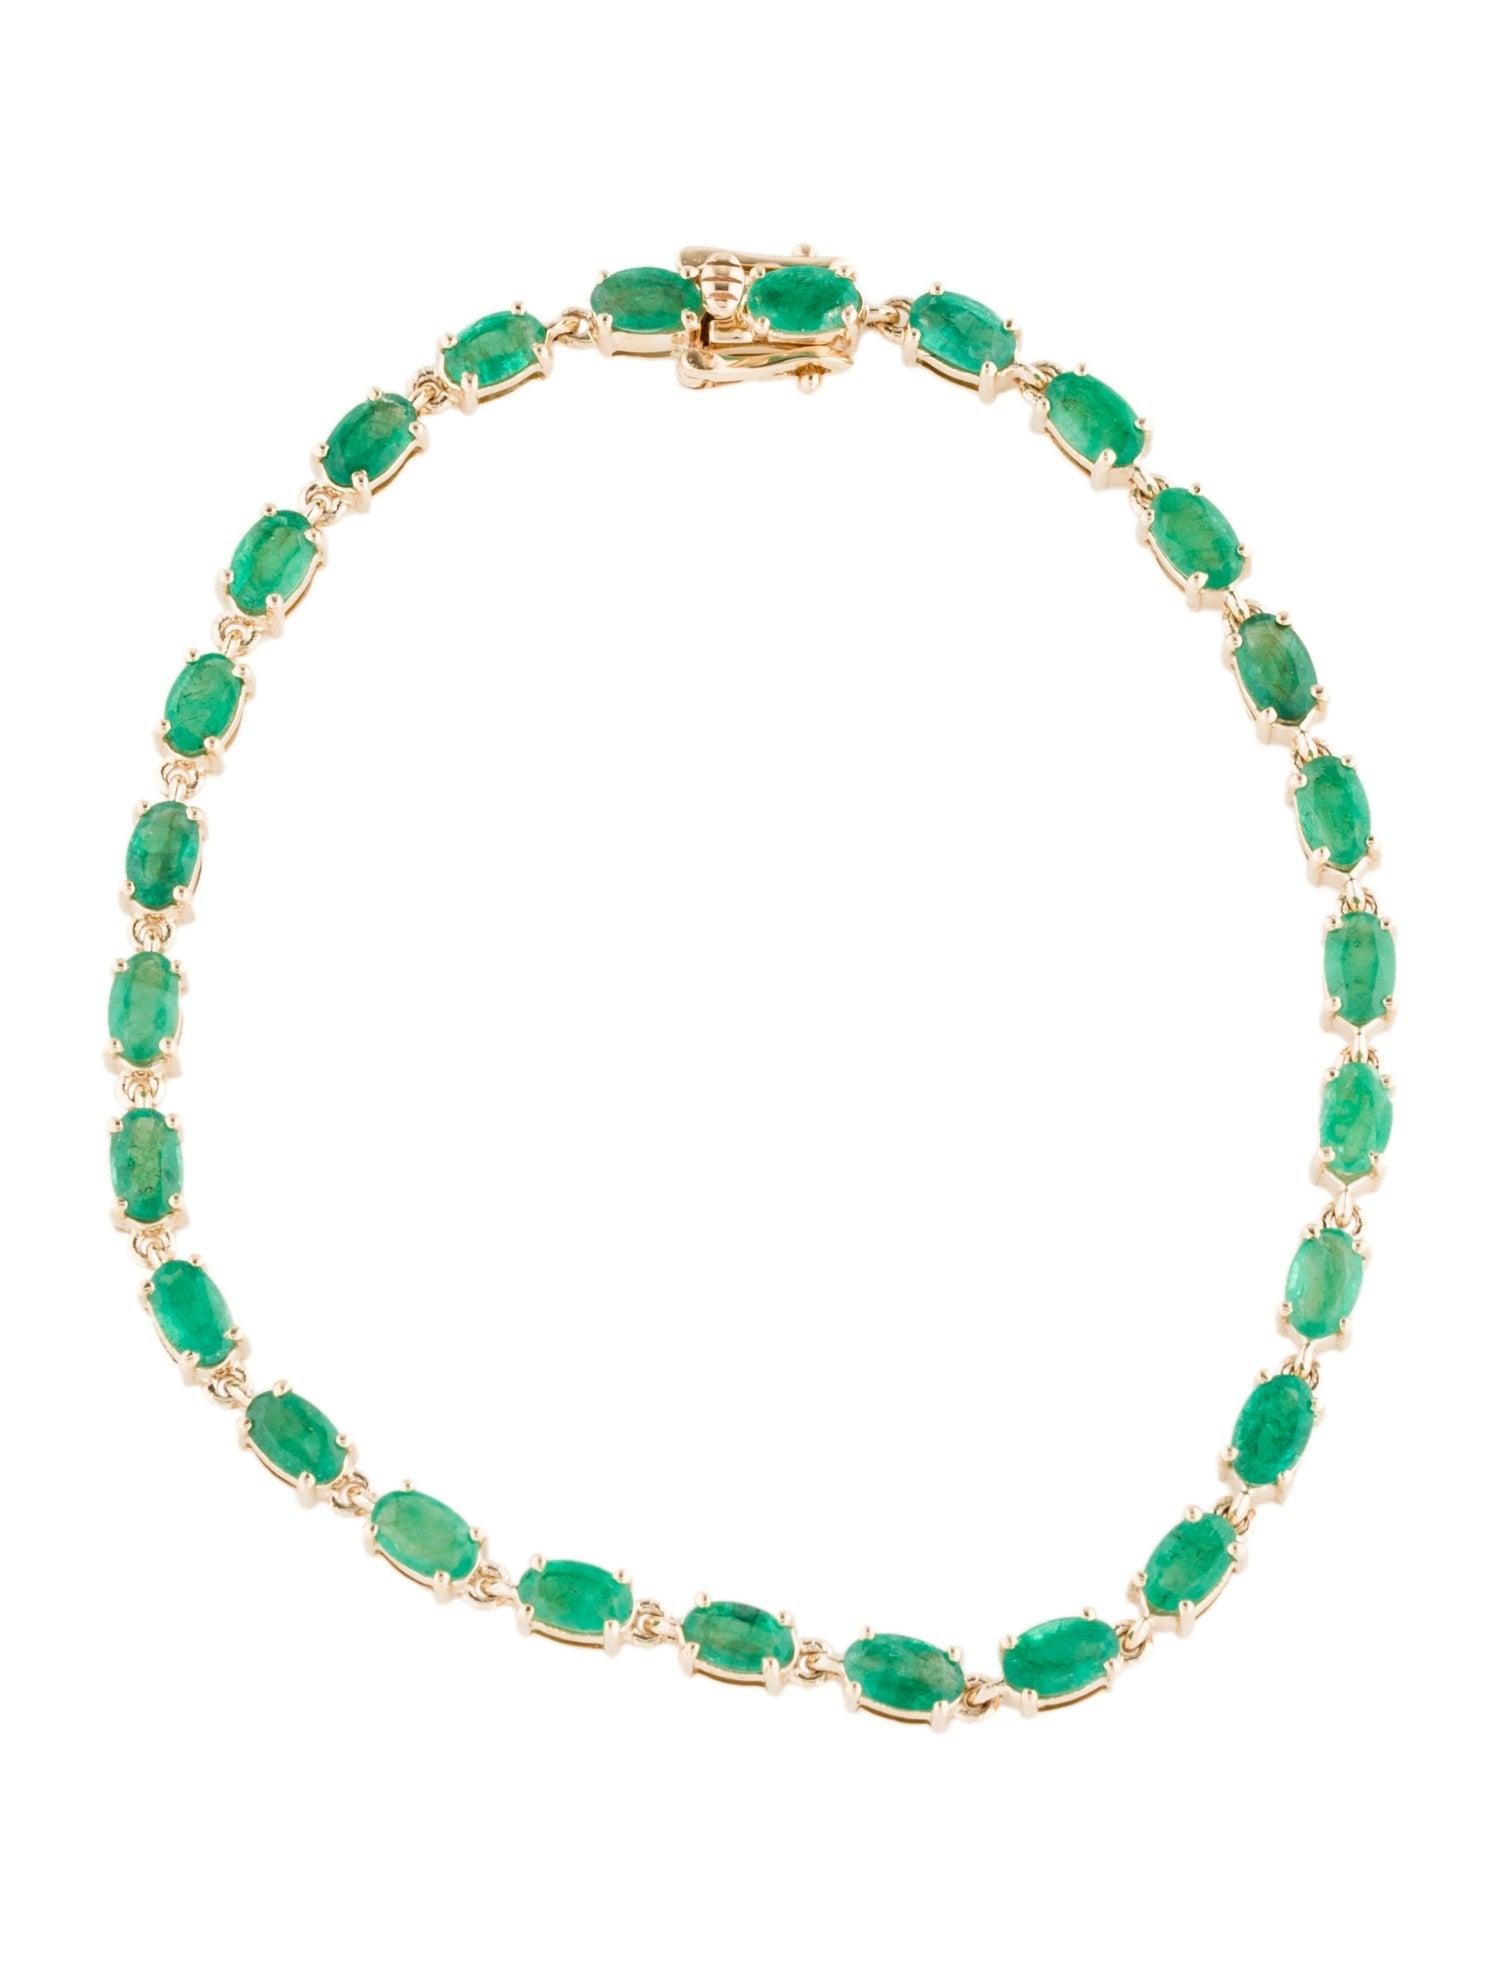 Presenting our exquisite 14K Yellow Gold Emerald Link Bracelet, a luxurious addition to any fine jewelry collection. Crafted with precision, this bracelet features a total of 7.79 carats of Oval Modified Brilliant Emeralds, each selected for their